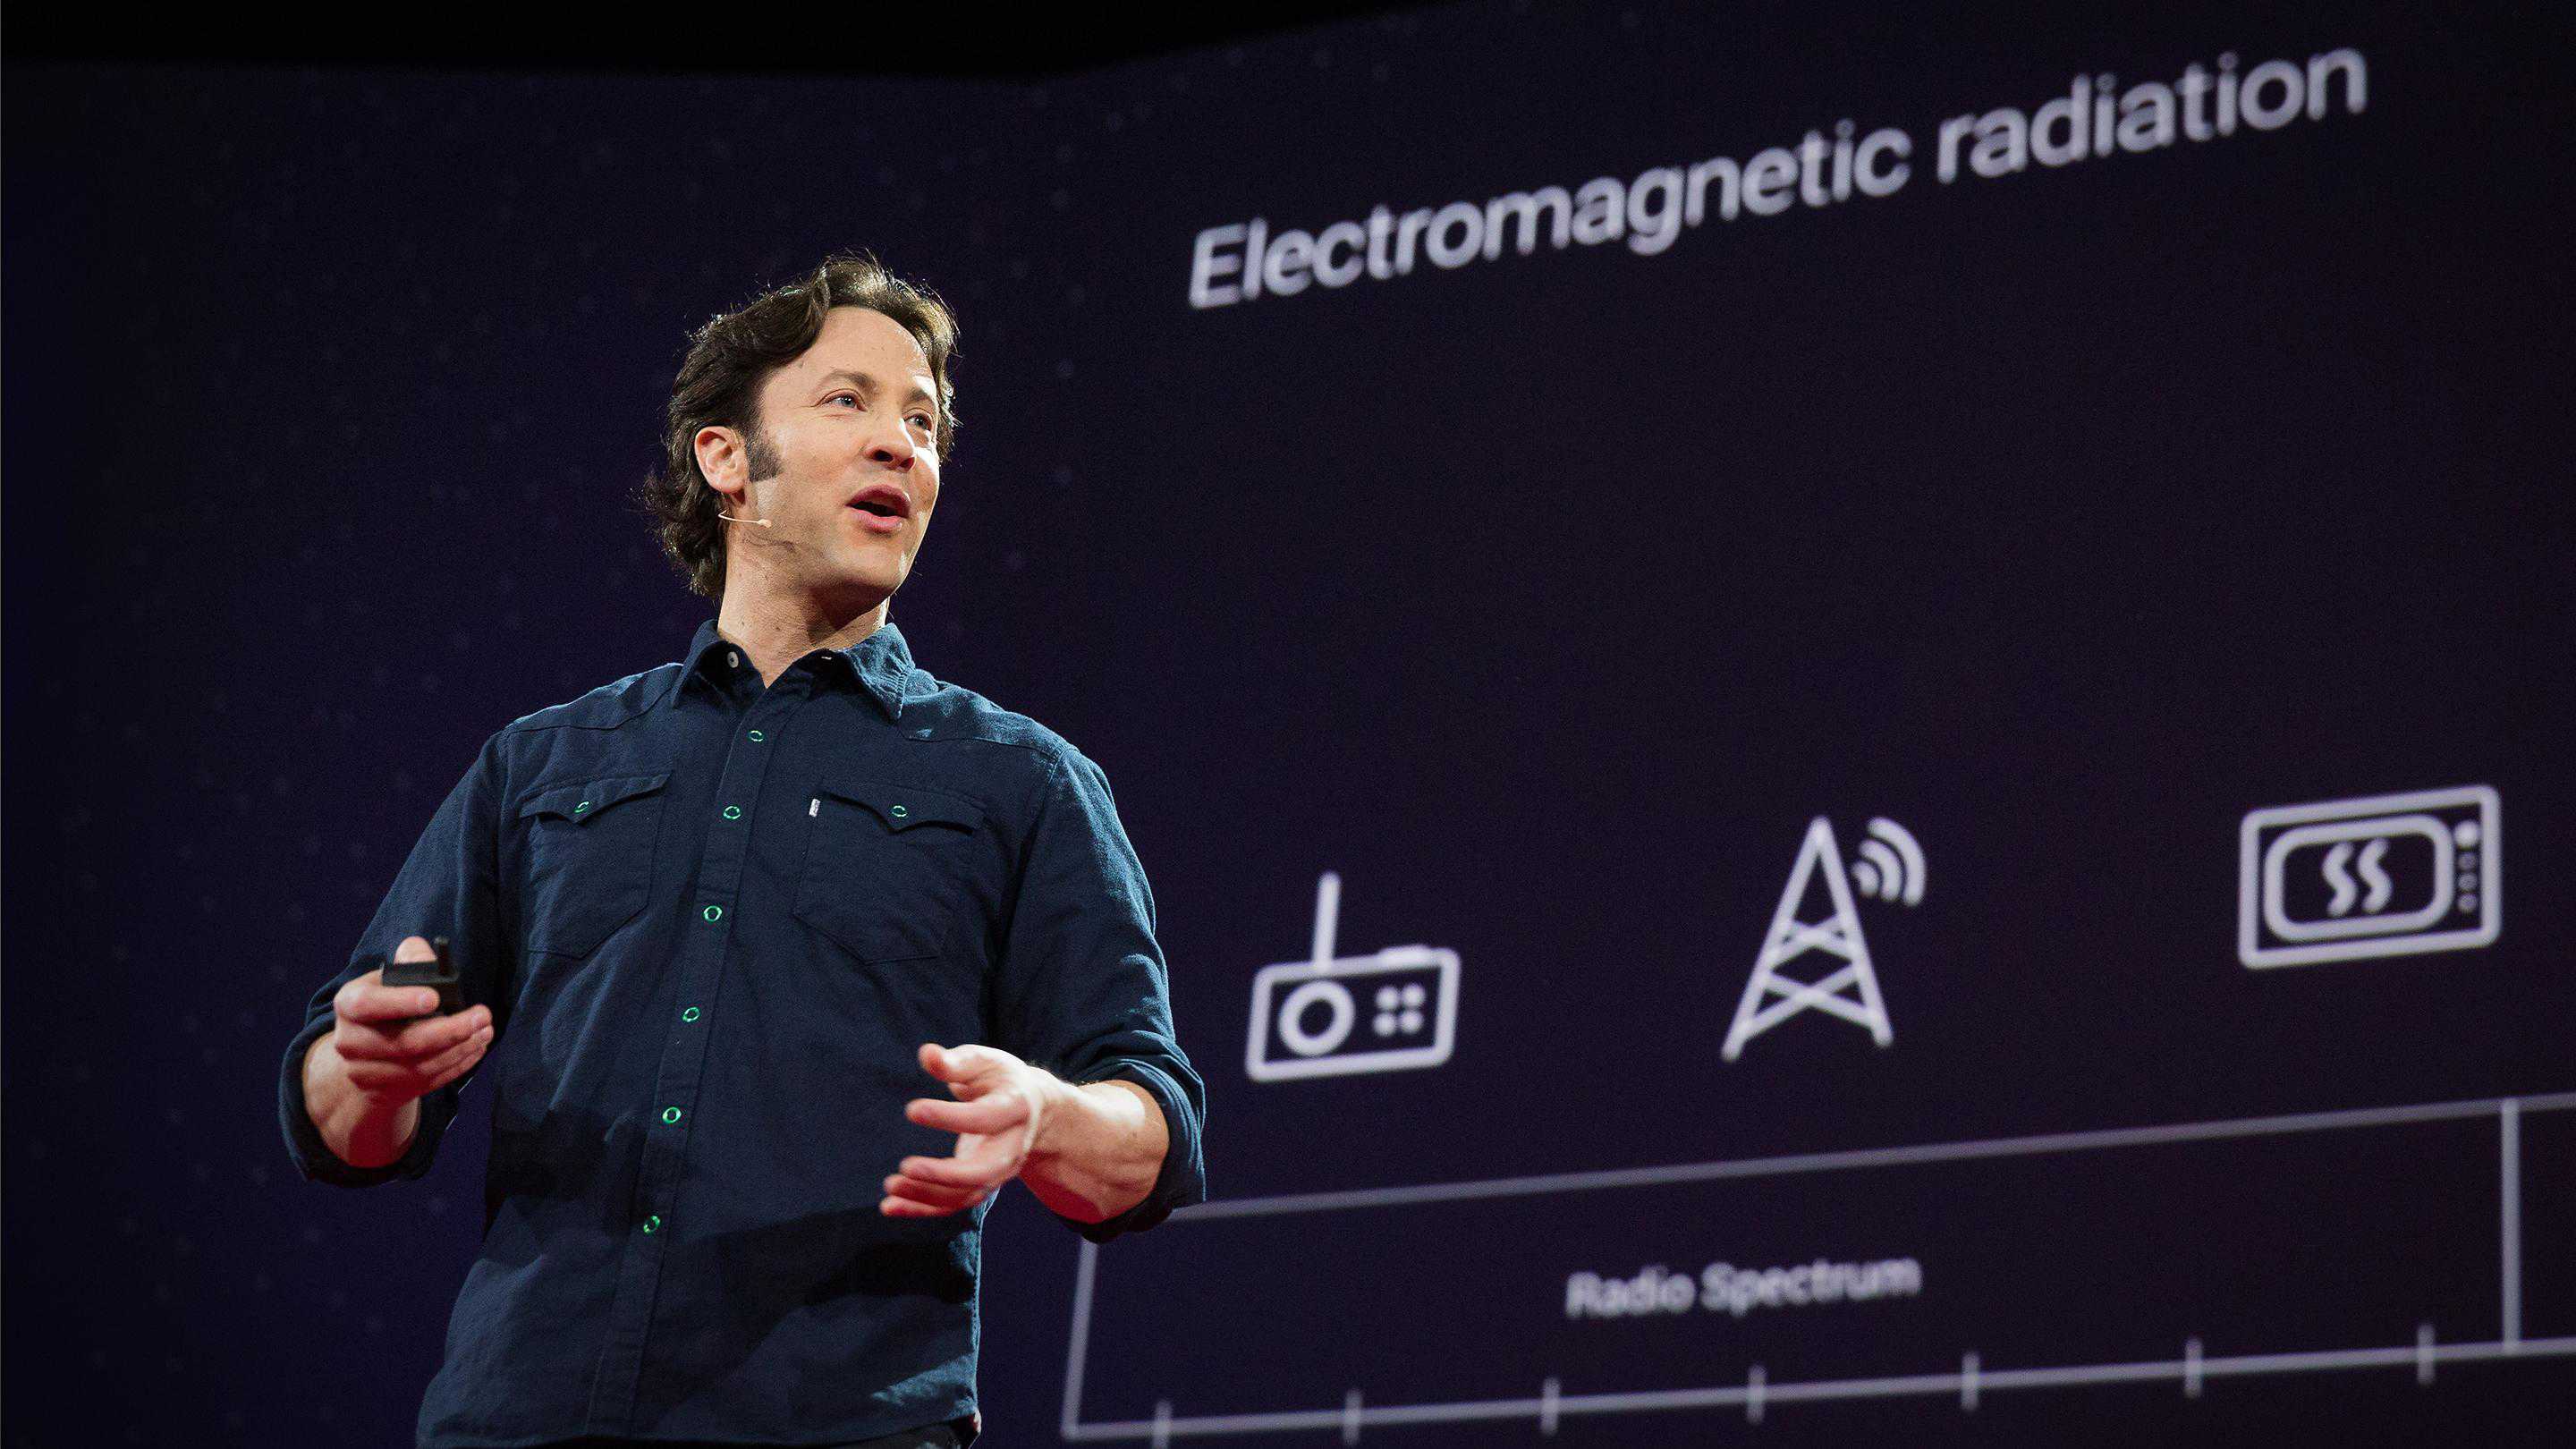 David Eagleman, a light-skinned man with dark hair, gives a talk on the TED stage